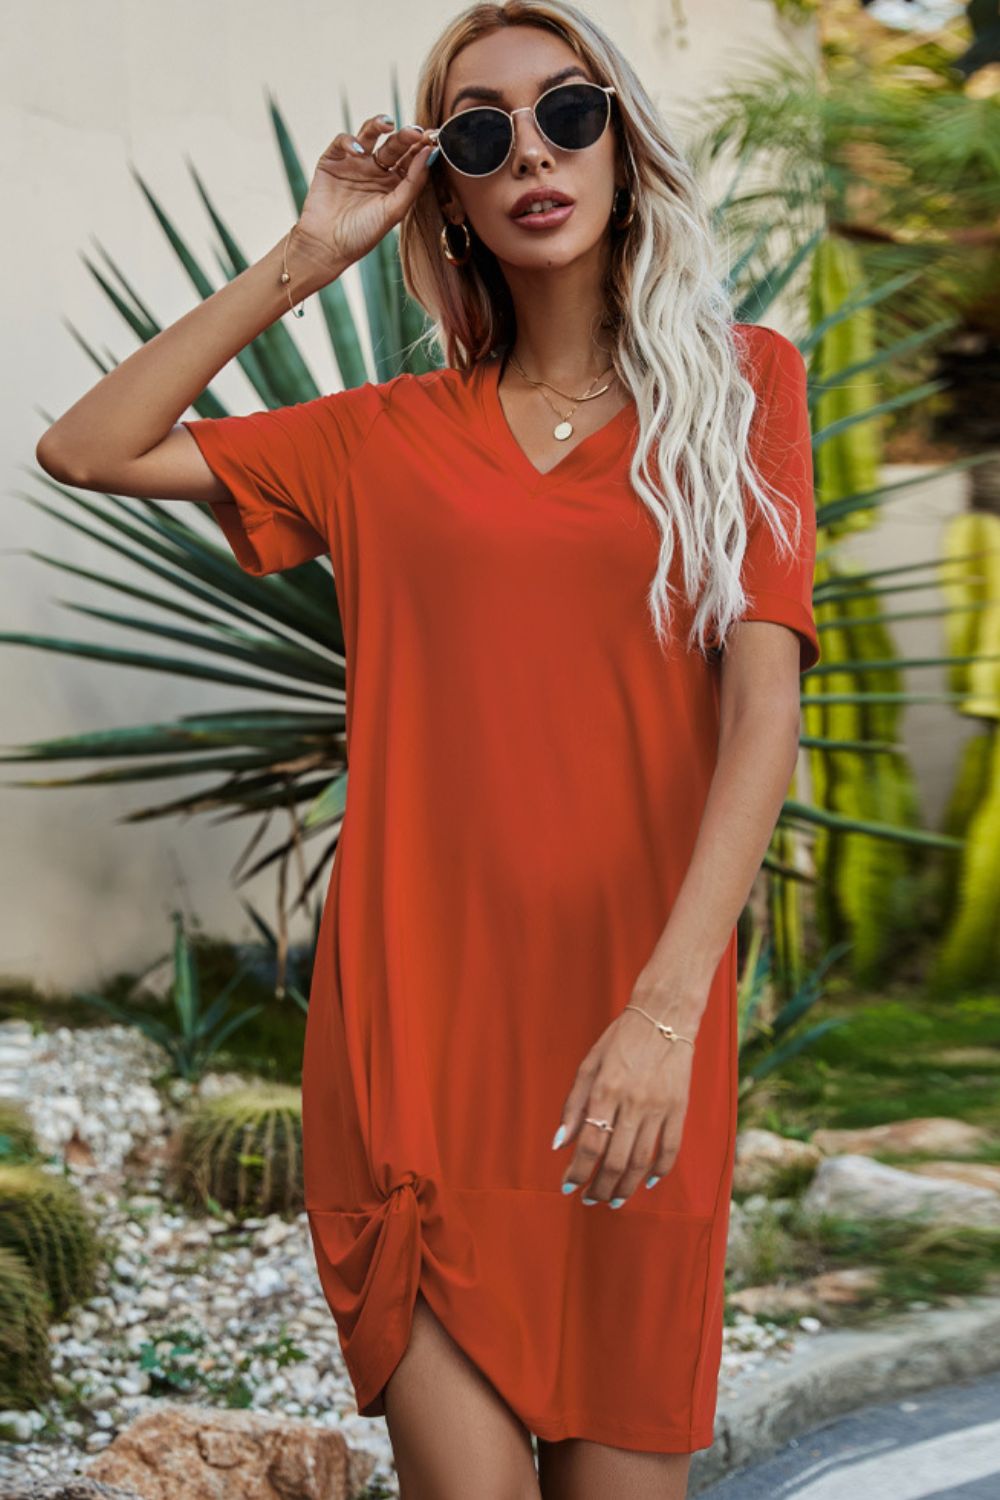 Enchantress of the Summer Breeze - Embrace your gentle movements with a flirtatious twist - Let the Twisted V-neck Short Sleeve Dress captivate your heart. - Guy Christopher